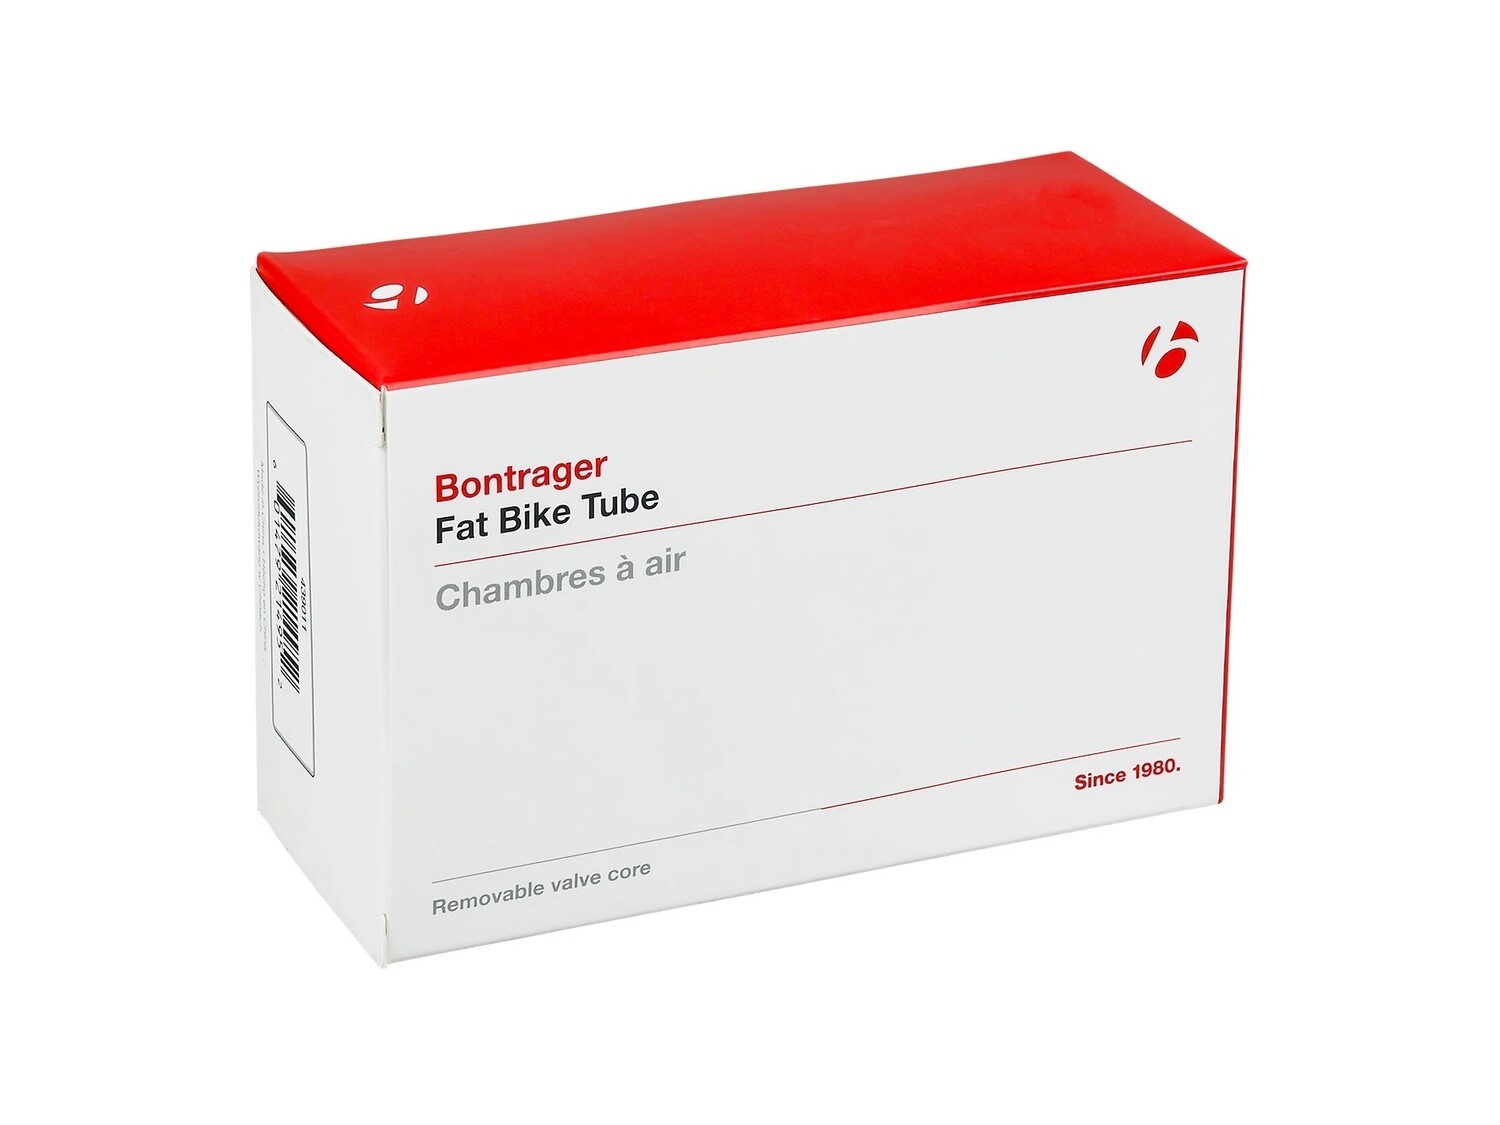 Bontrager Fat and + Presta Valve Bicycle Tube 29 x 2.50-3.00